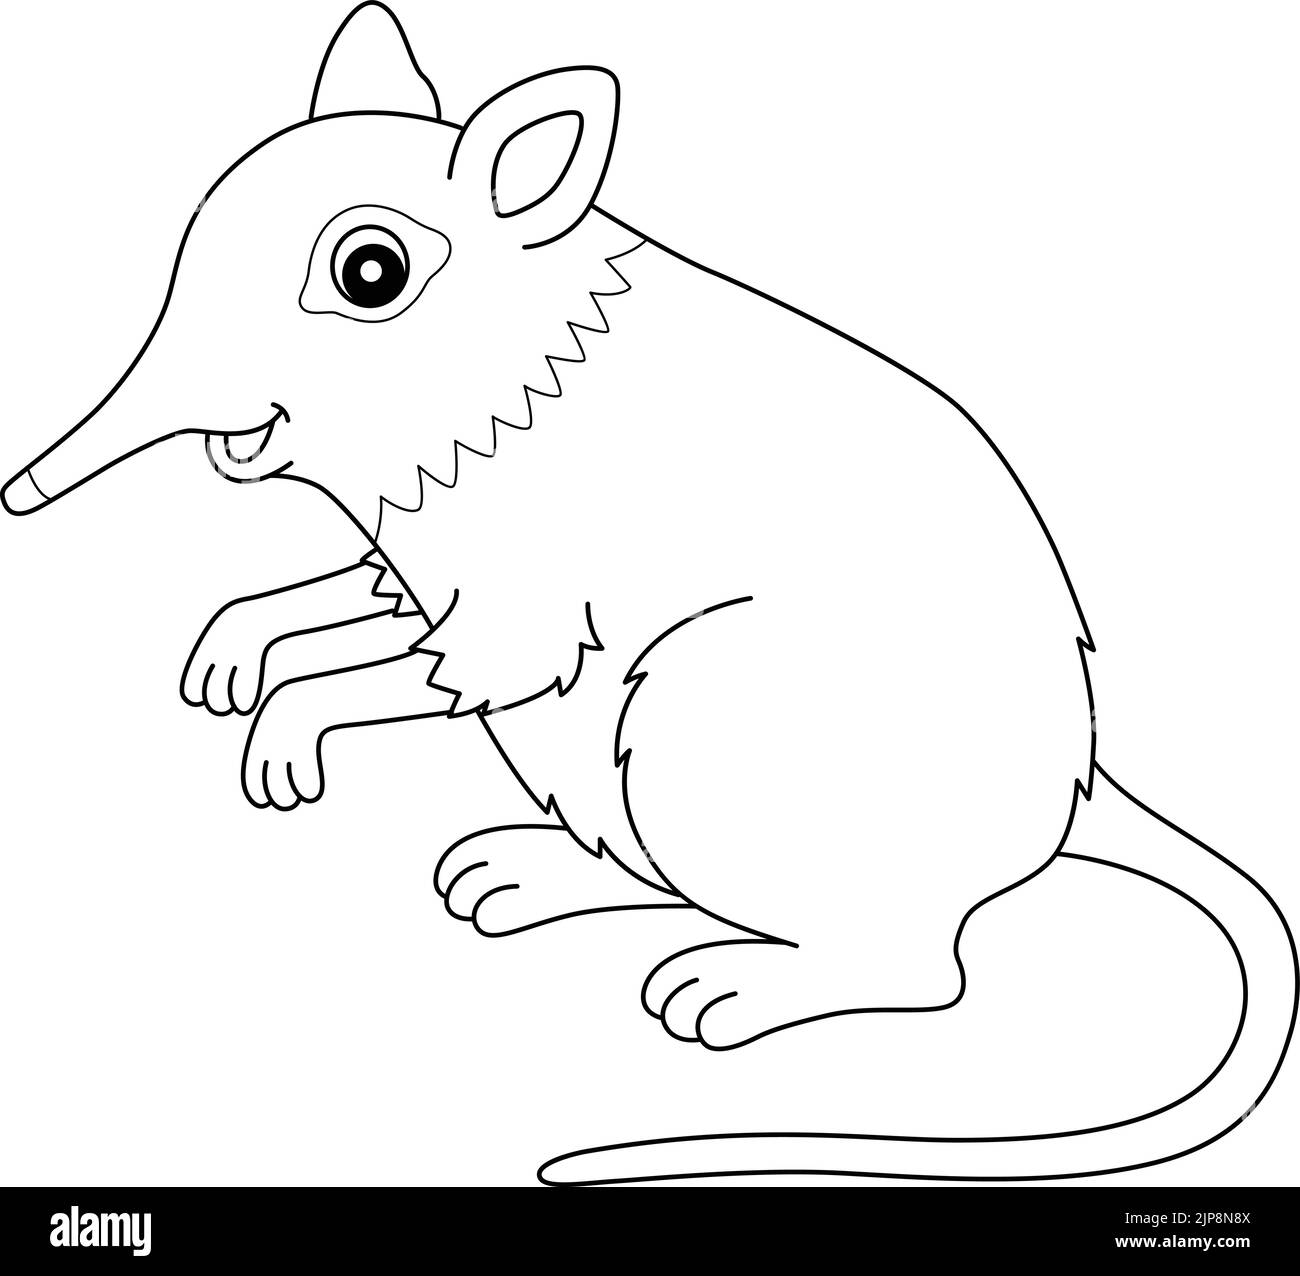 Elephant Shrew Animal Isolated Coloring Page Stock Vektor